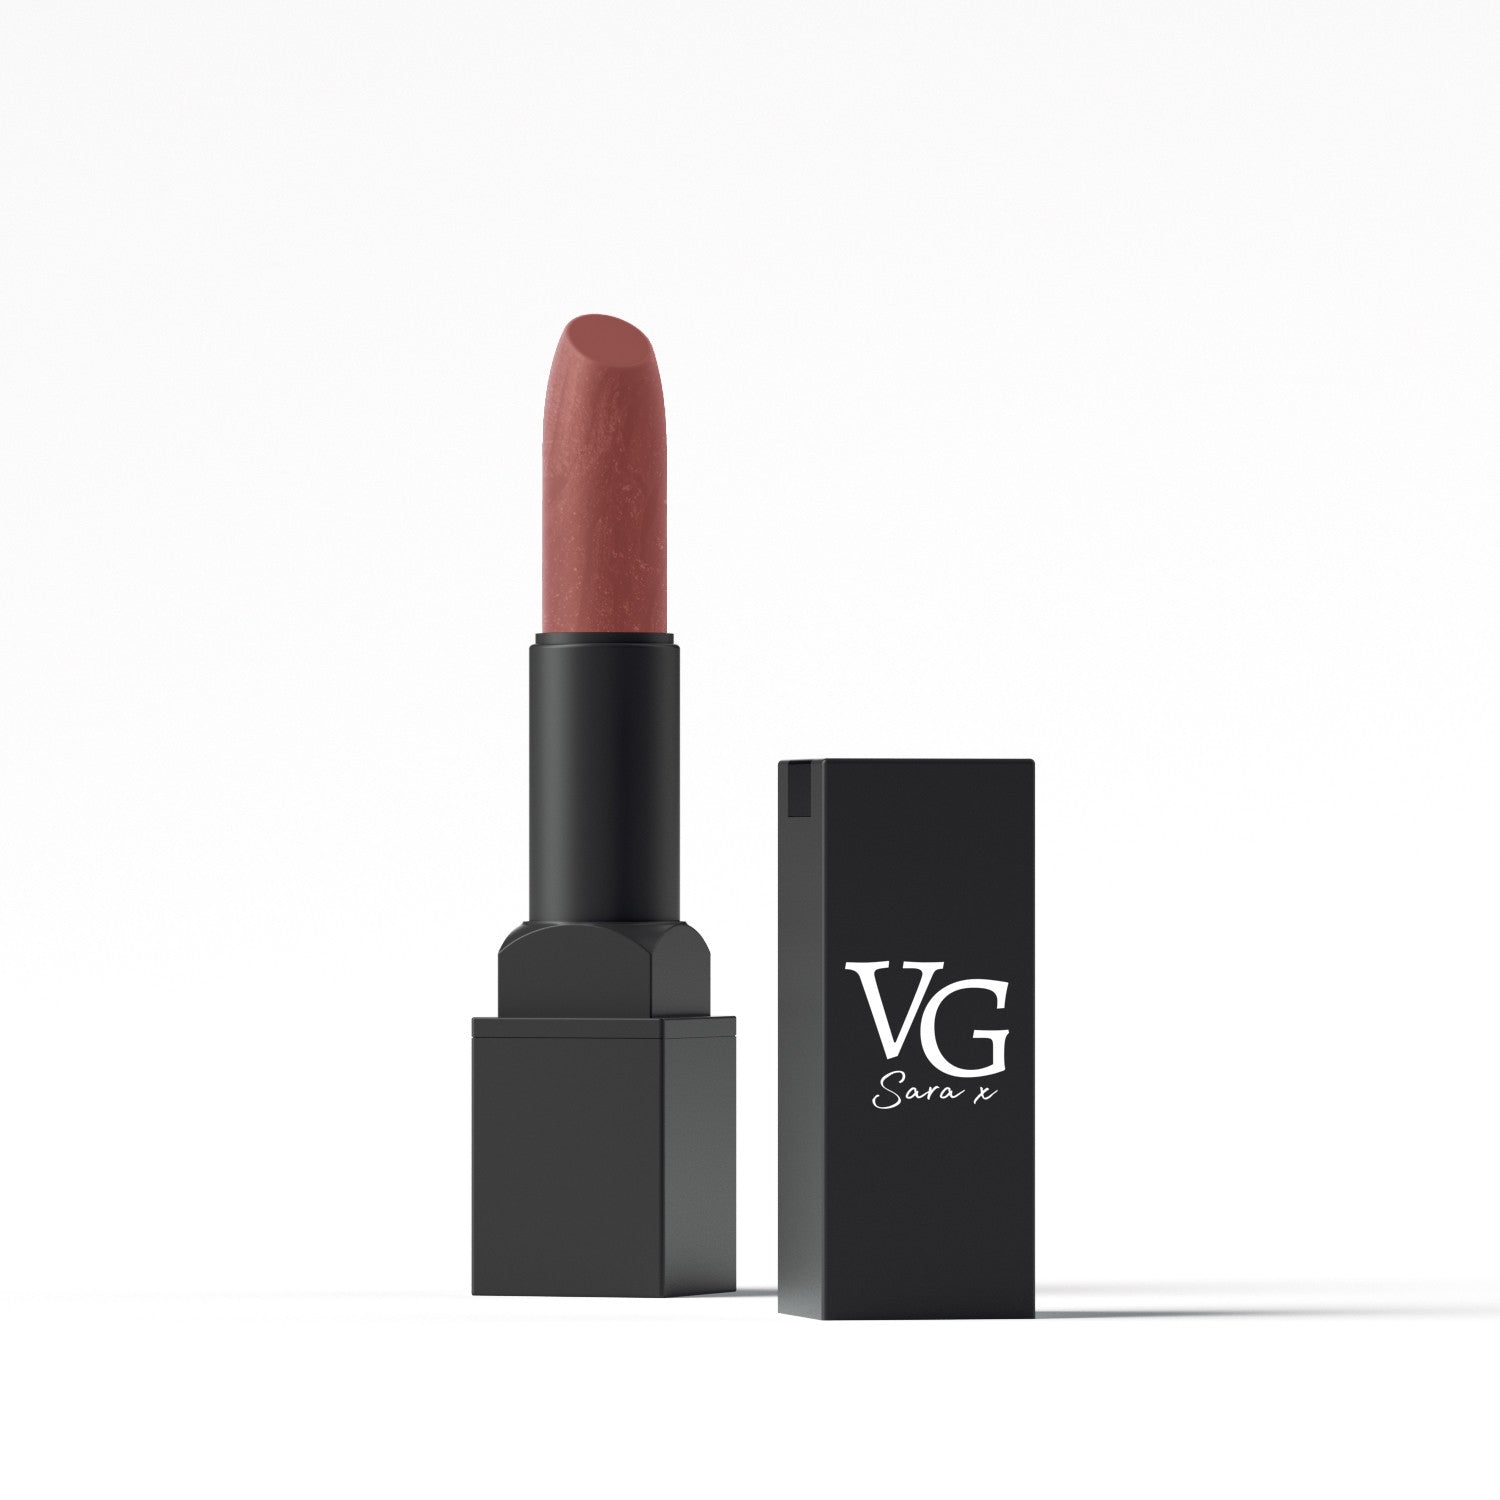 VG Cosmetics lipstick with a focus on the logo representing a vitamin-enriched formula